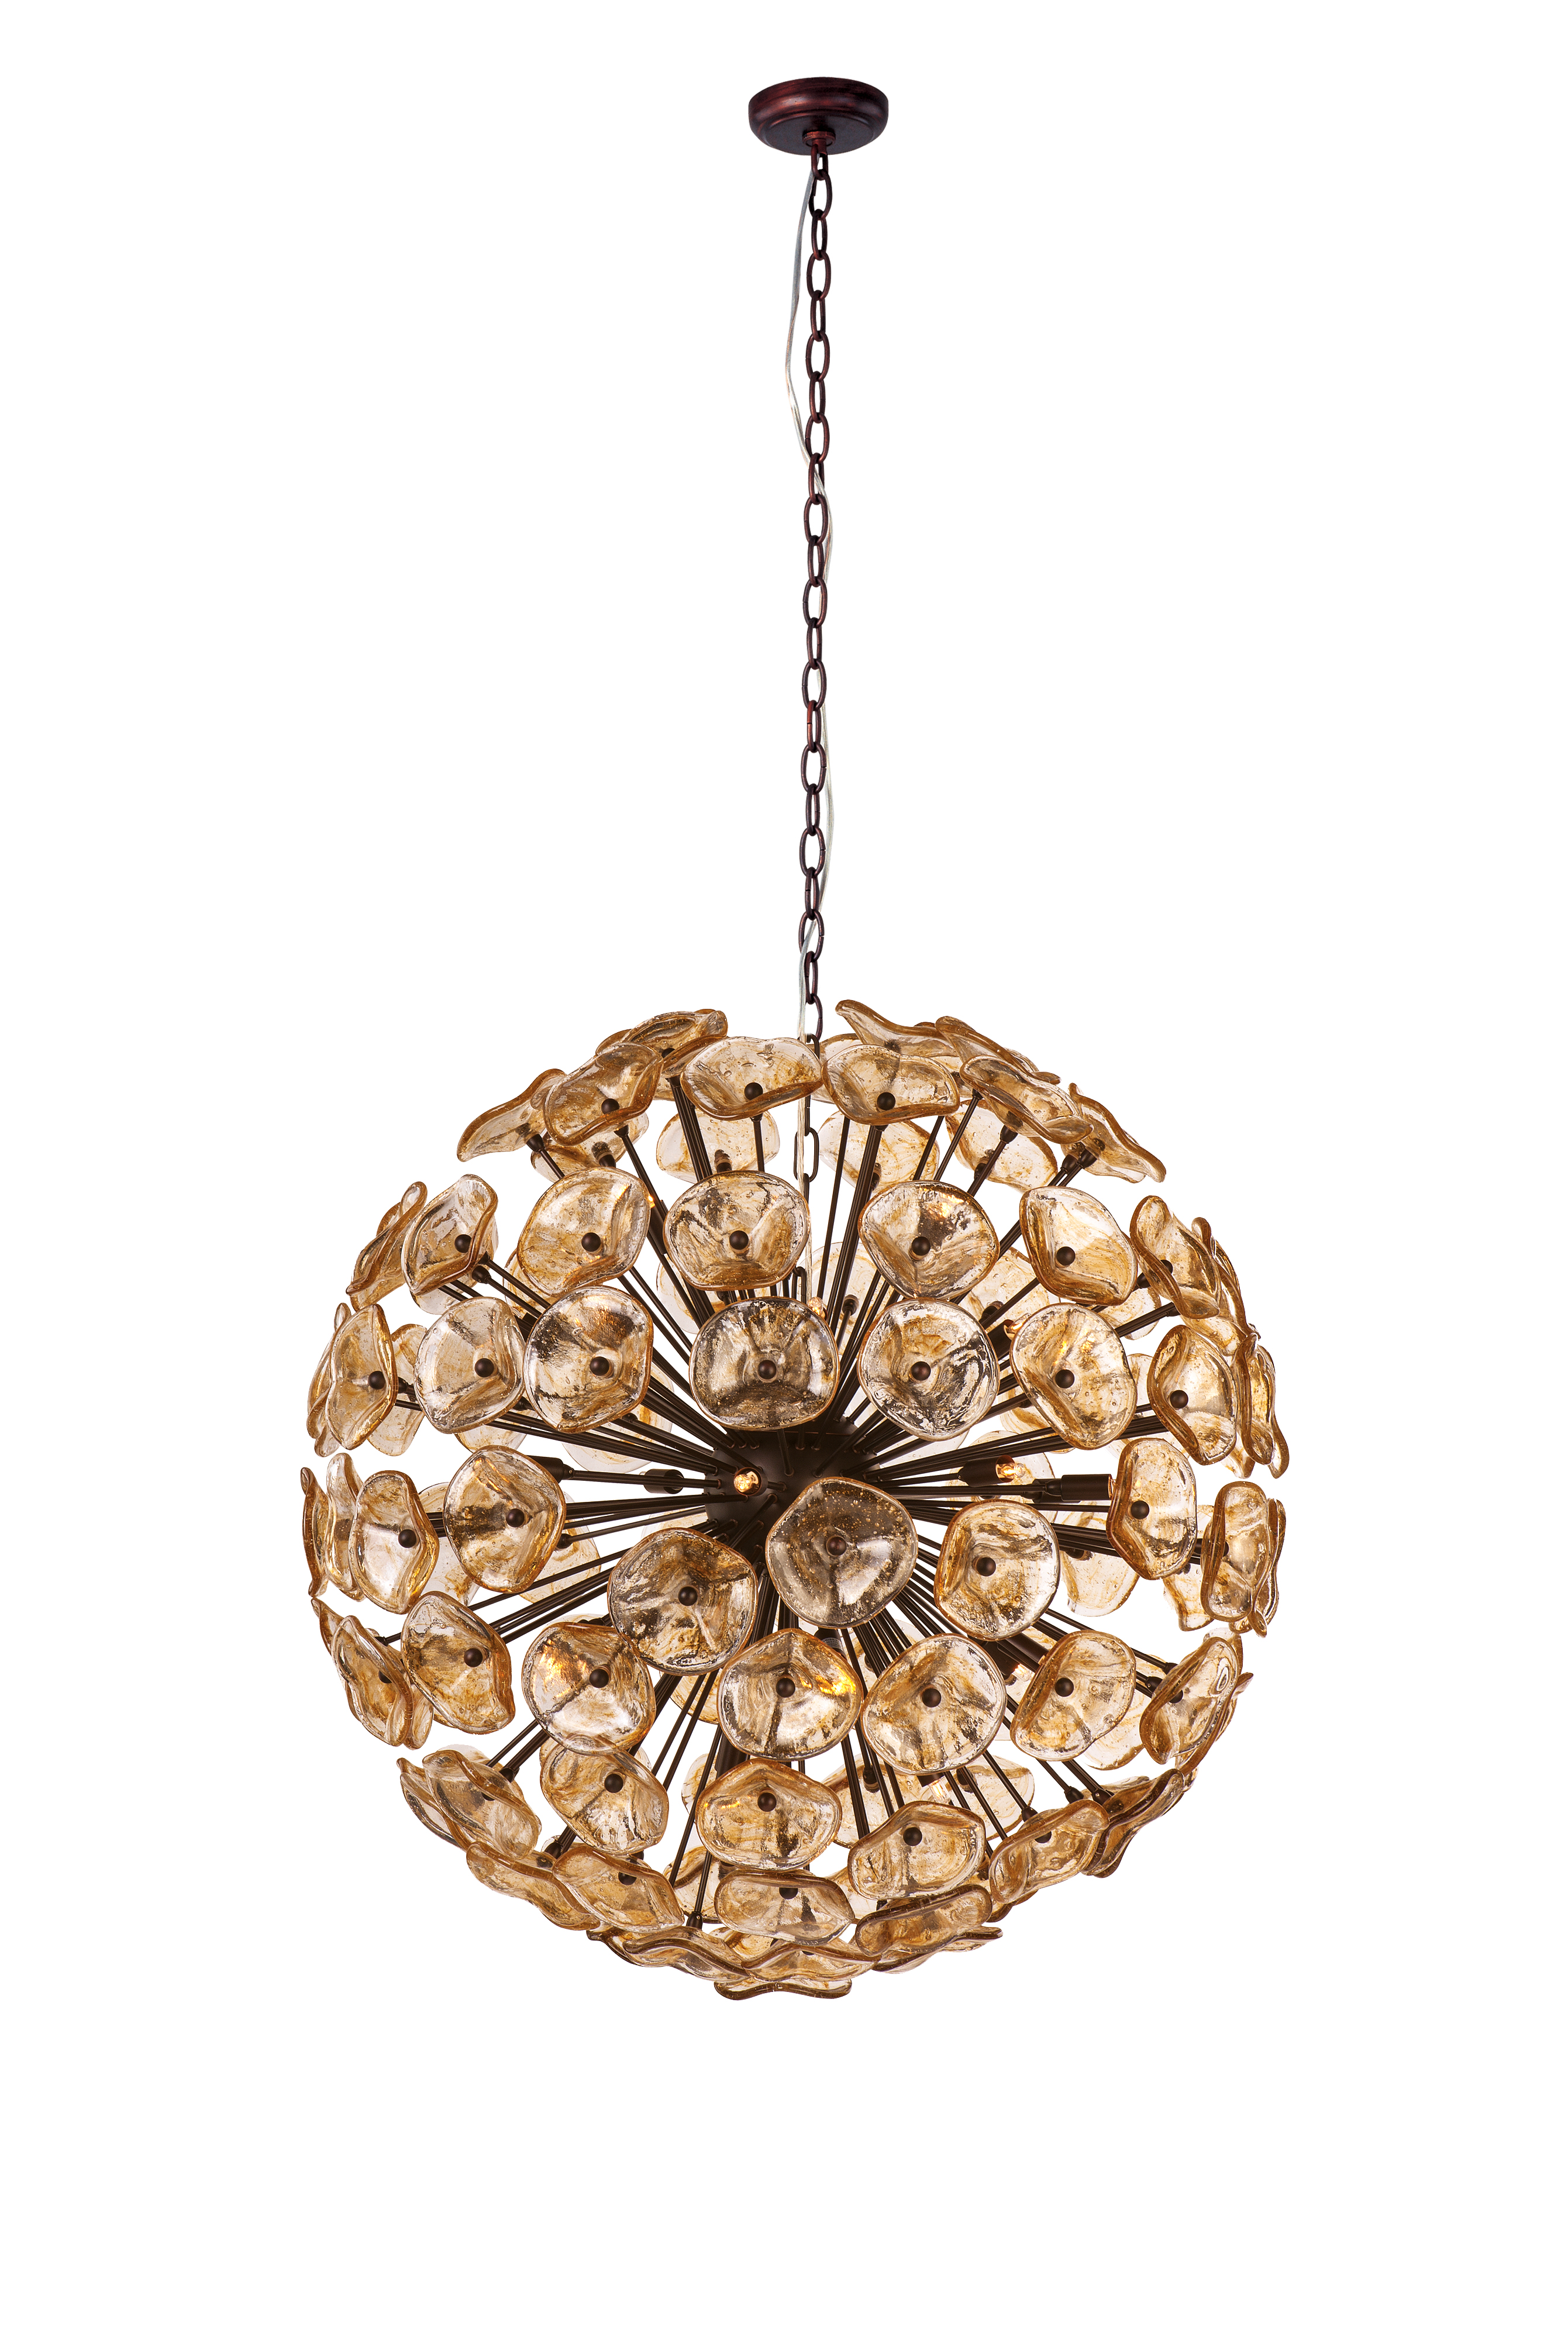 E22096-26-ET2 Lighting-Fiori-28 Light Pendant in Leaf style-31.5 Inches wide by 70.9 inches high - image 1 of 6